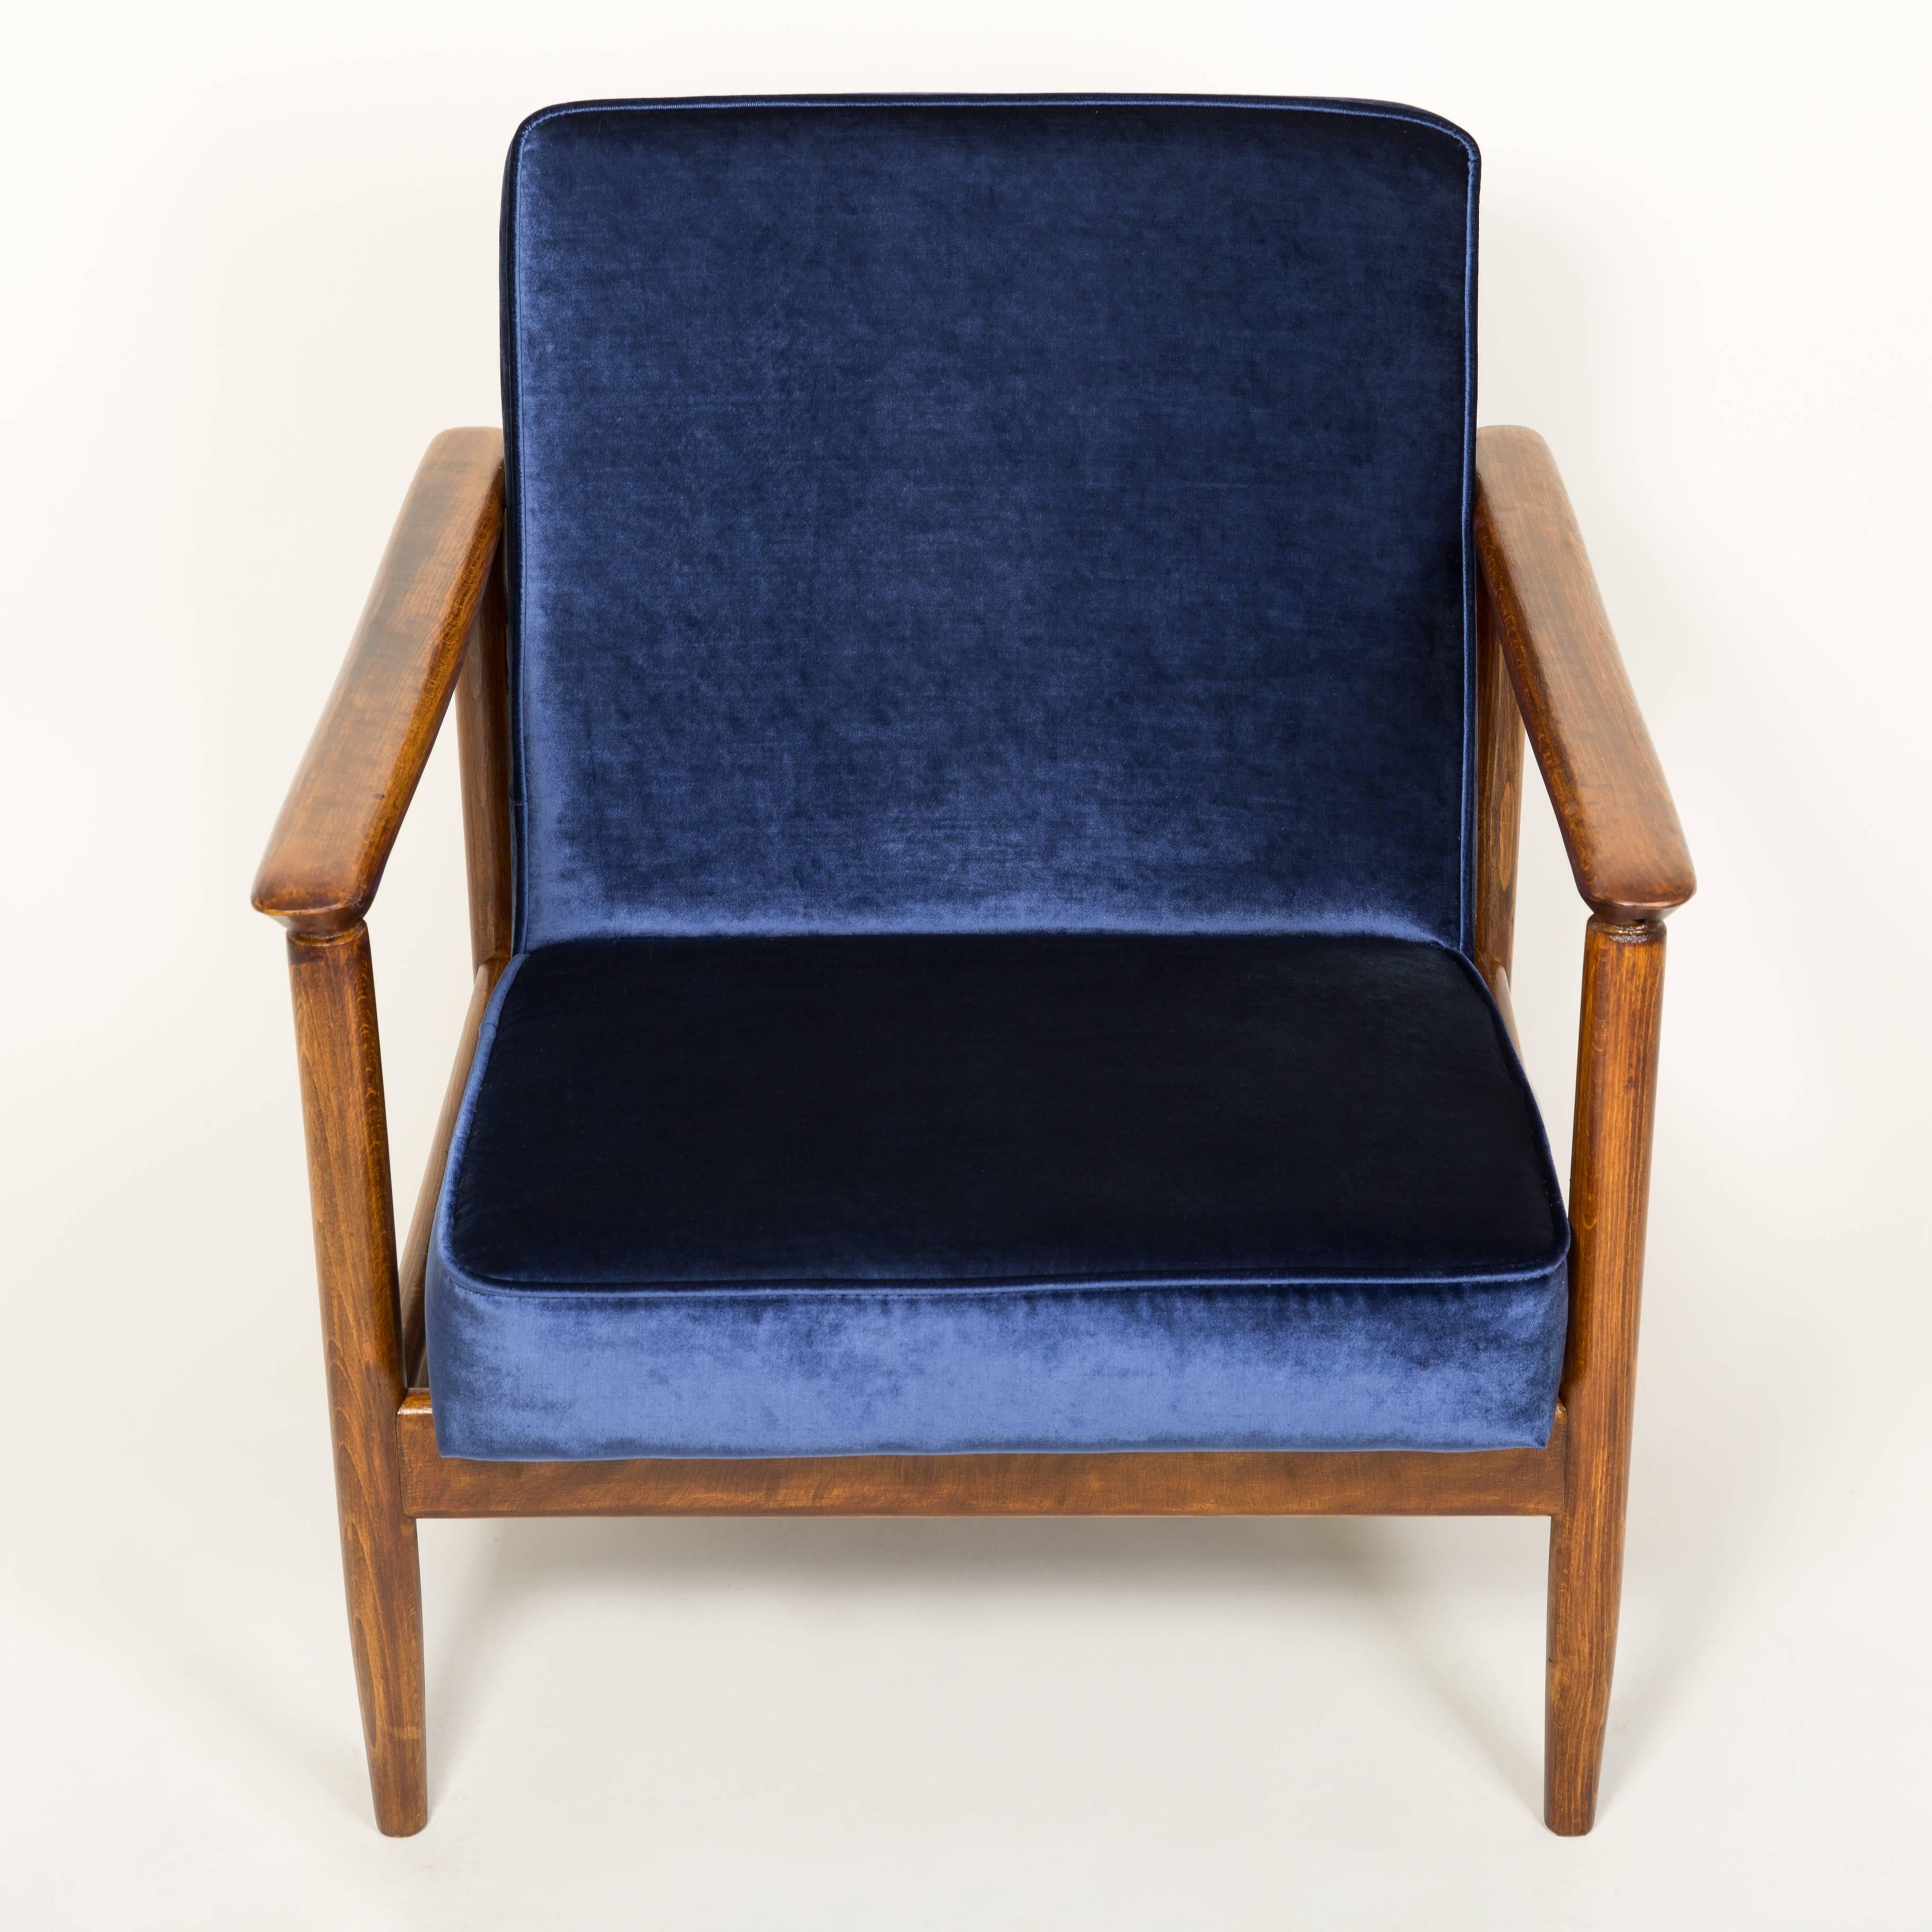 Beautiful armchair model GFM-142, designed by Edmund Homa. The armchair was made in the 1960s in the Gosciecinska Furniture Factory. Frame is made from solid beech wood. The GFM-142 armchair is regarded one of the best Polish armchair design from